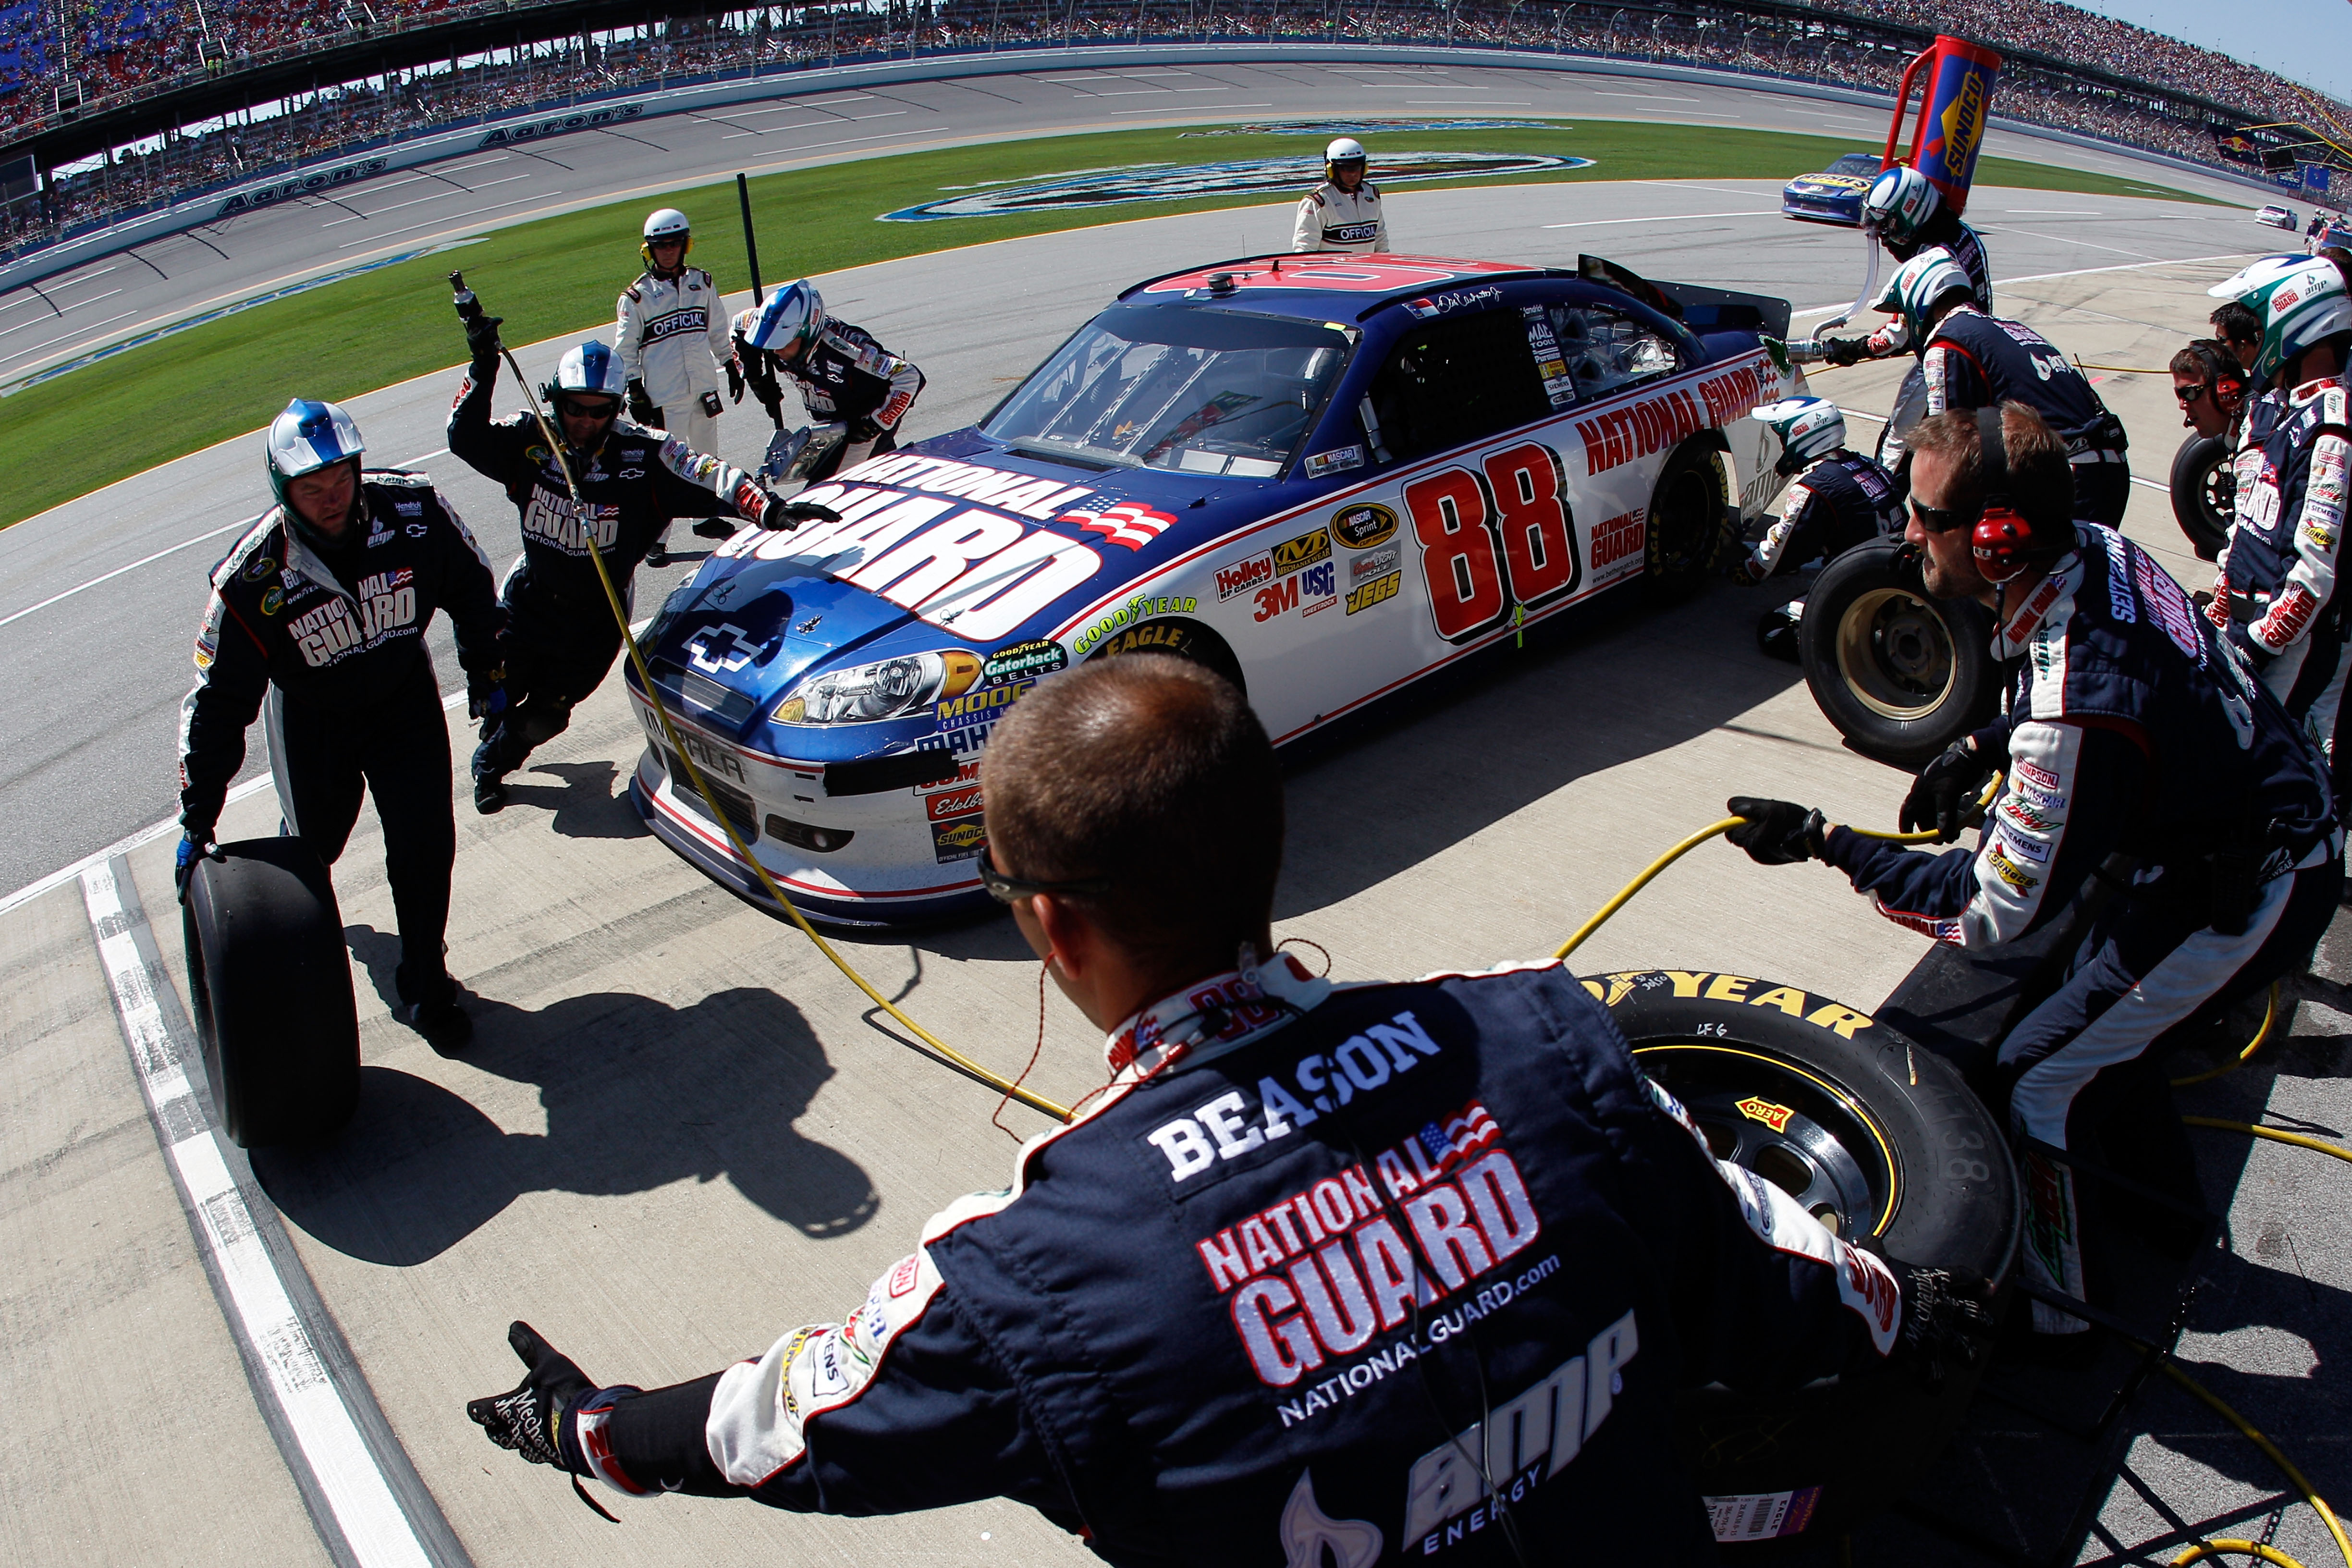 TALLADEGA, AL - APRIL 17:  Dale Earnhardt Jr., driver of the #88 National Guard/AMP Energy Chevrolet, comes in for a pit stop during the NASCAR Sprint Cup Series Aaron's 499 at Talladega Superspeedway on April 17, 2011 in Talladega, Alabama.  (Photo by Ch